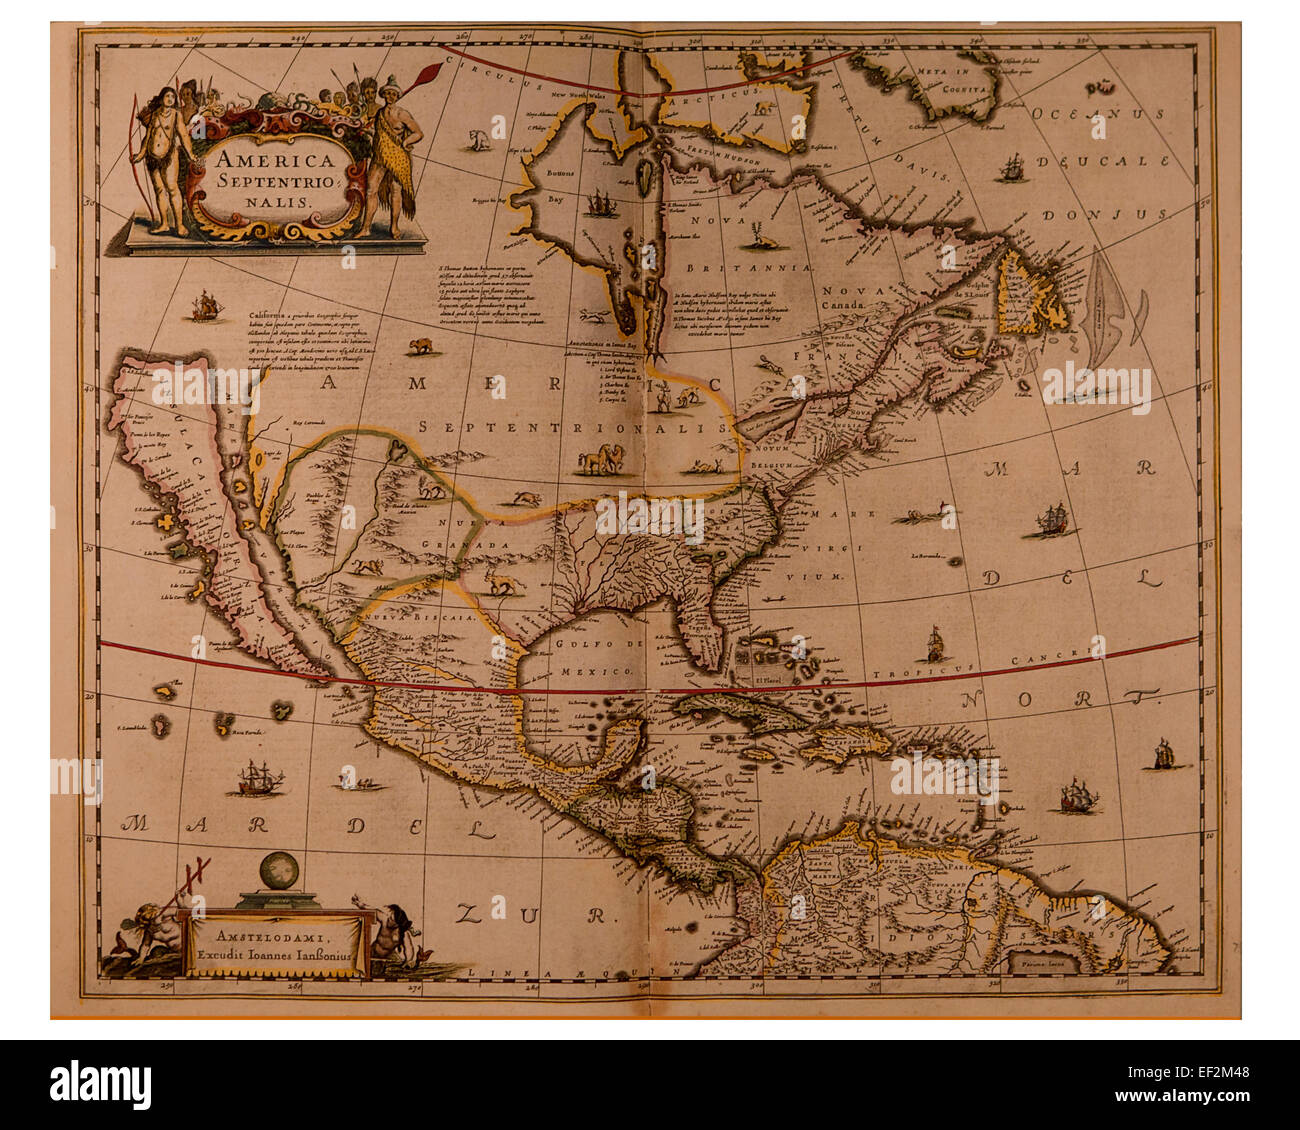 America Septentrionalis map made by Jan Jansson, circa 1641 Stock Photo